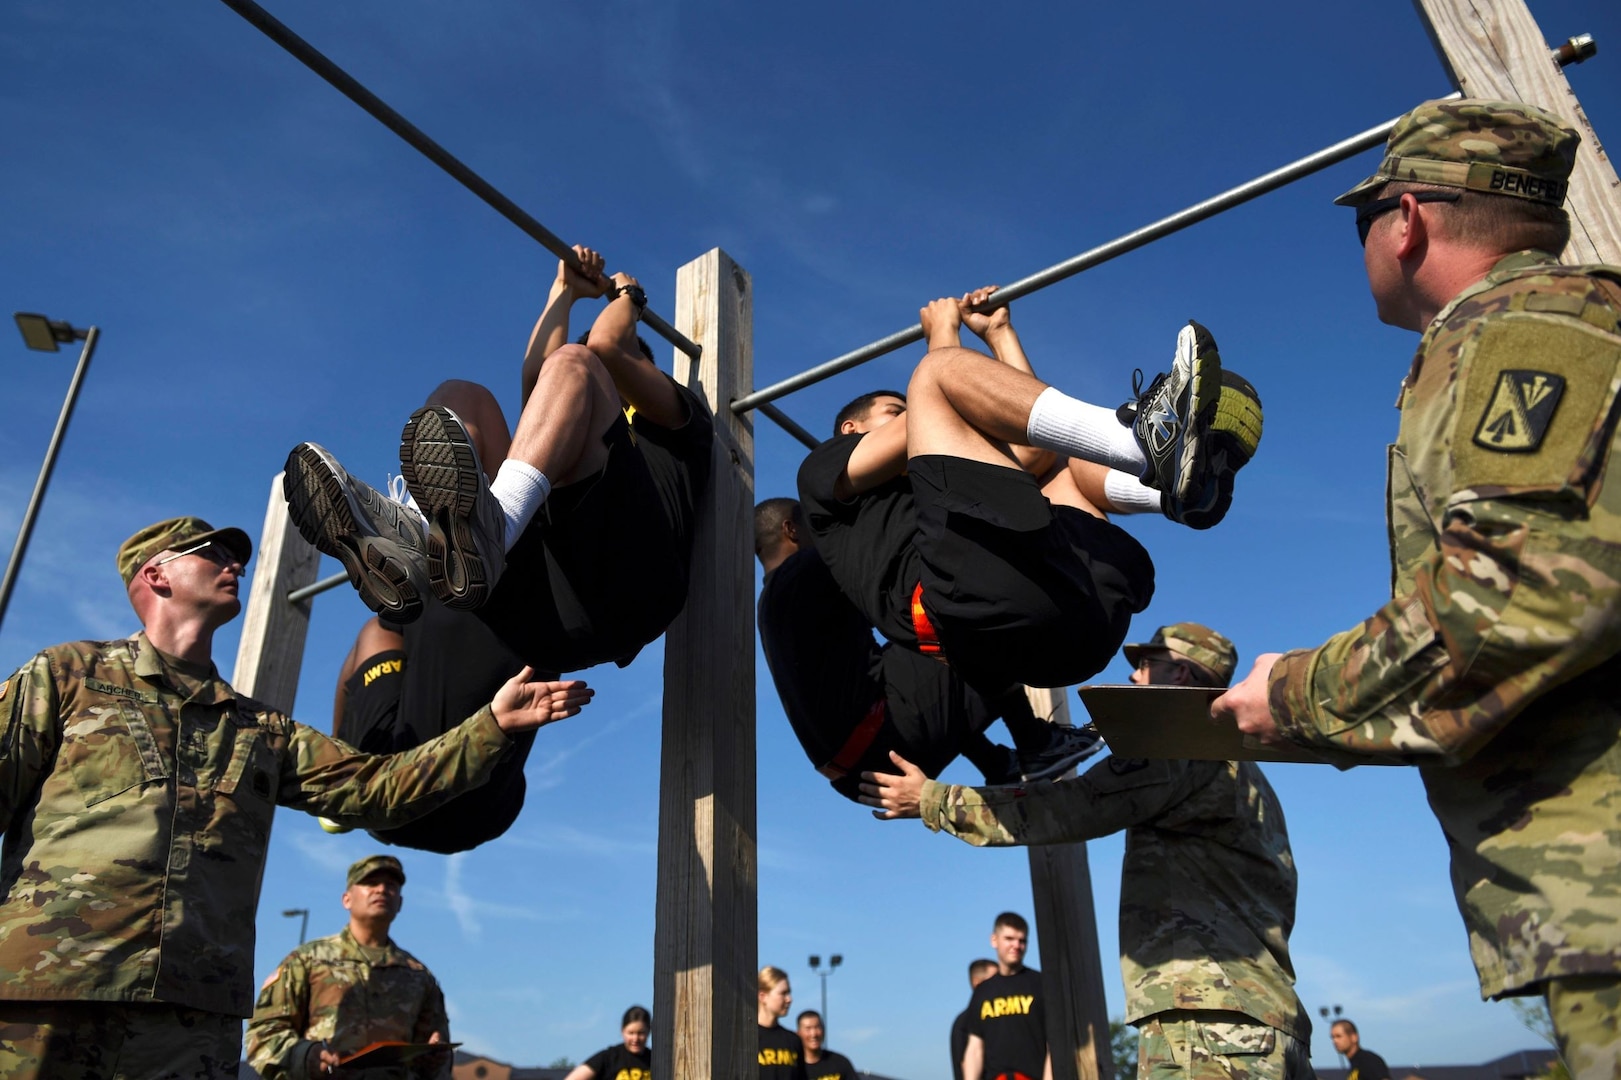 U.S. Army Advanced Individual Training students perform leg tucks during an Army Combat Fitness Test at Joint Base Langley-Eustis, Virginia, June 28, 2019. Leg tucks are the fifth event in the ACFT as it is a test of upper body and core muscle endurance that requires Soldiers to complete as many repetitions as possible in two minutes.